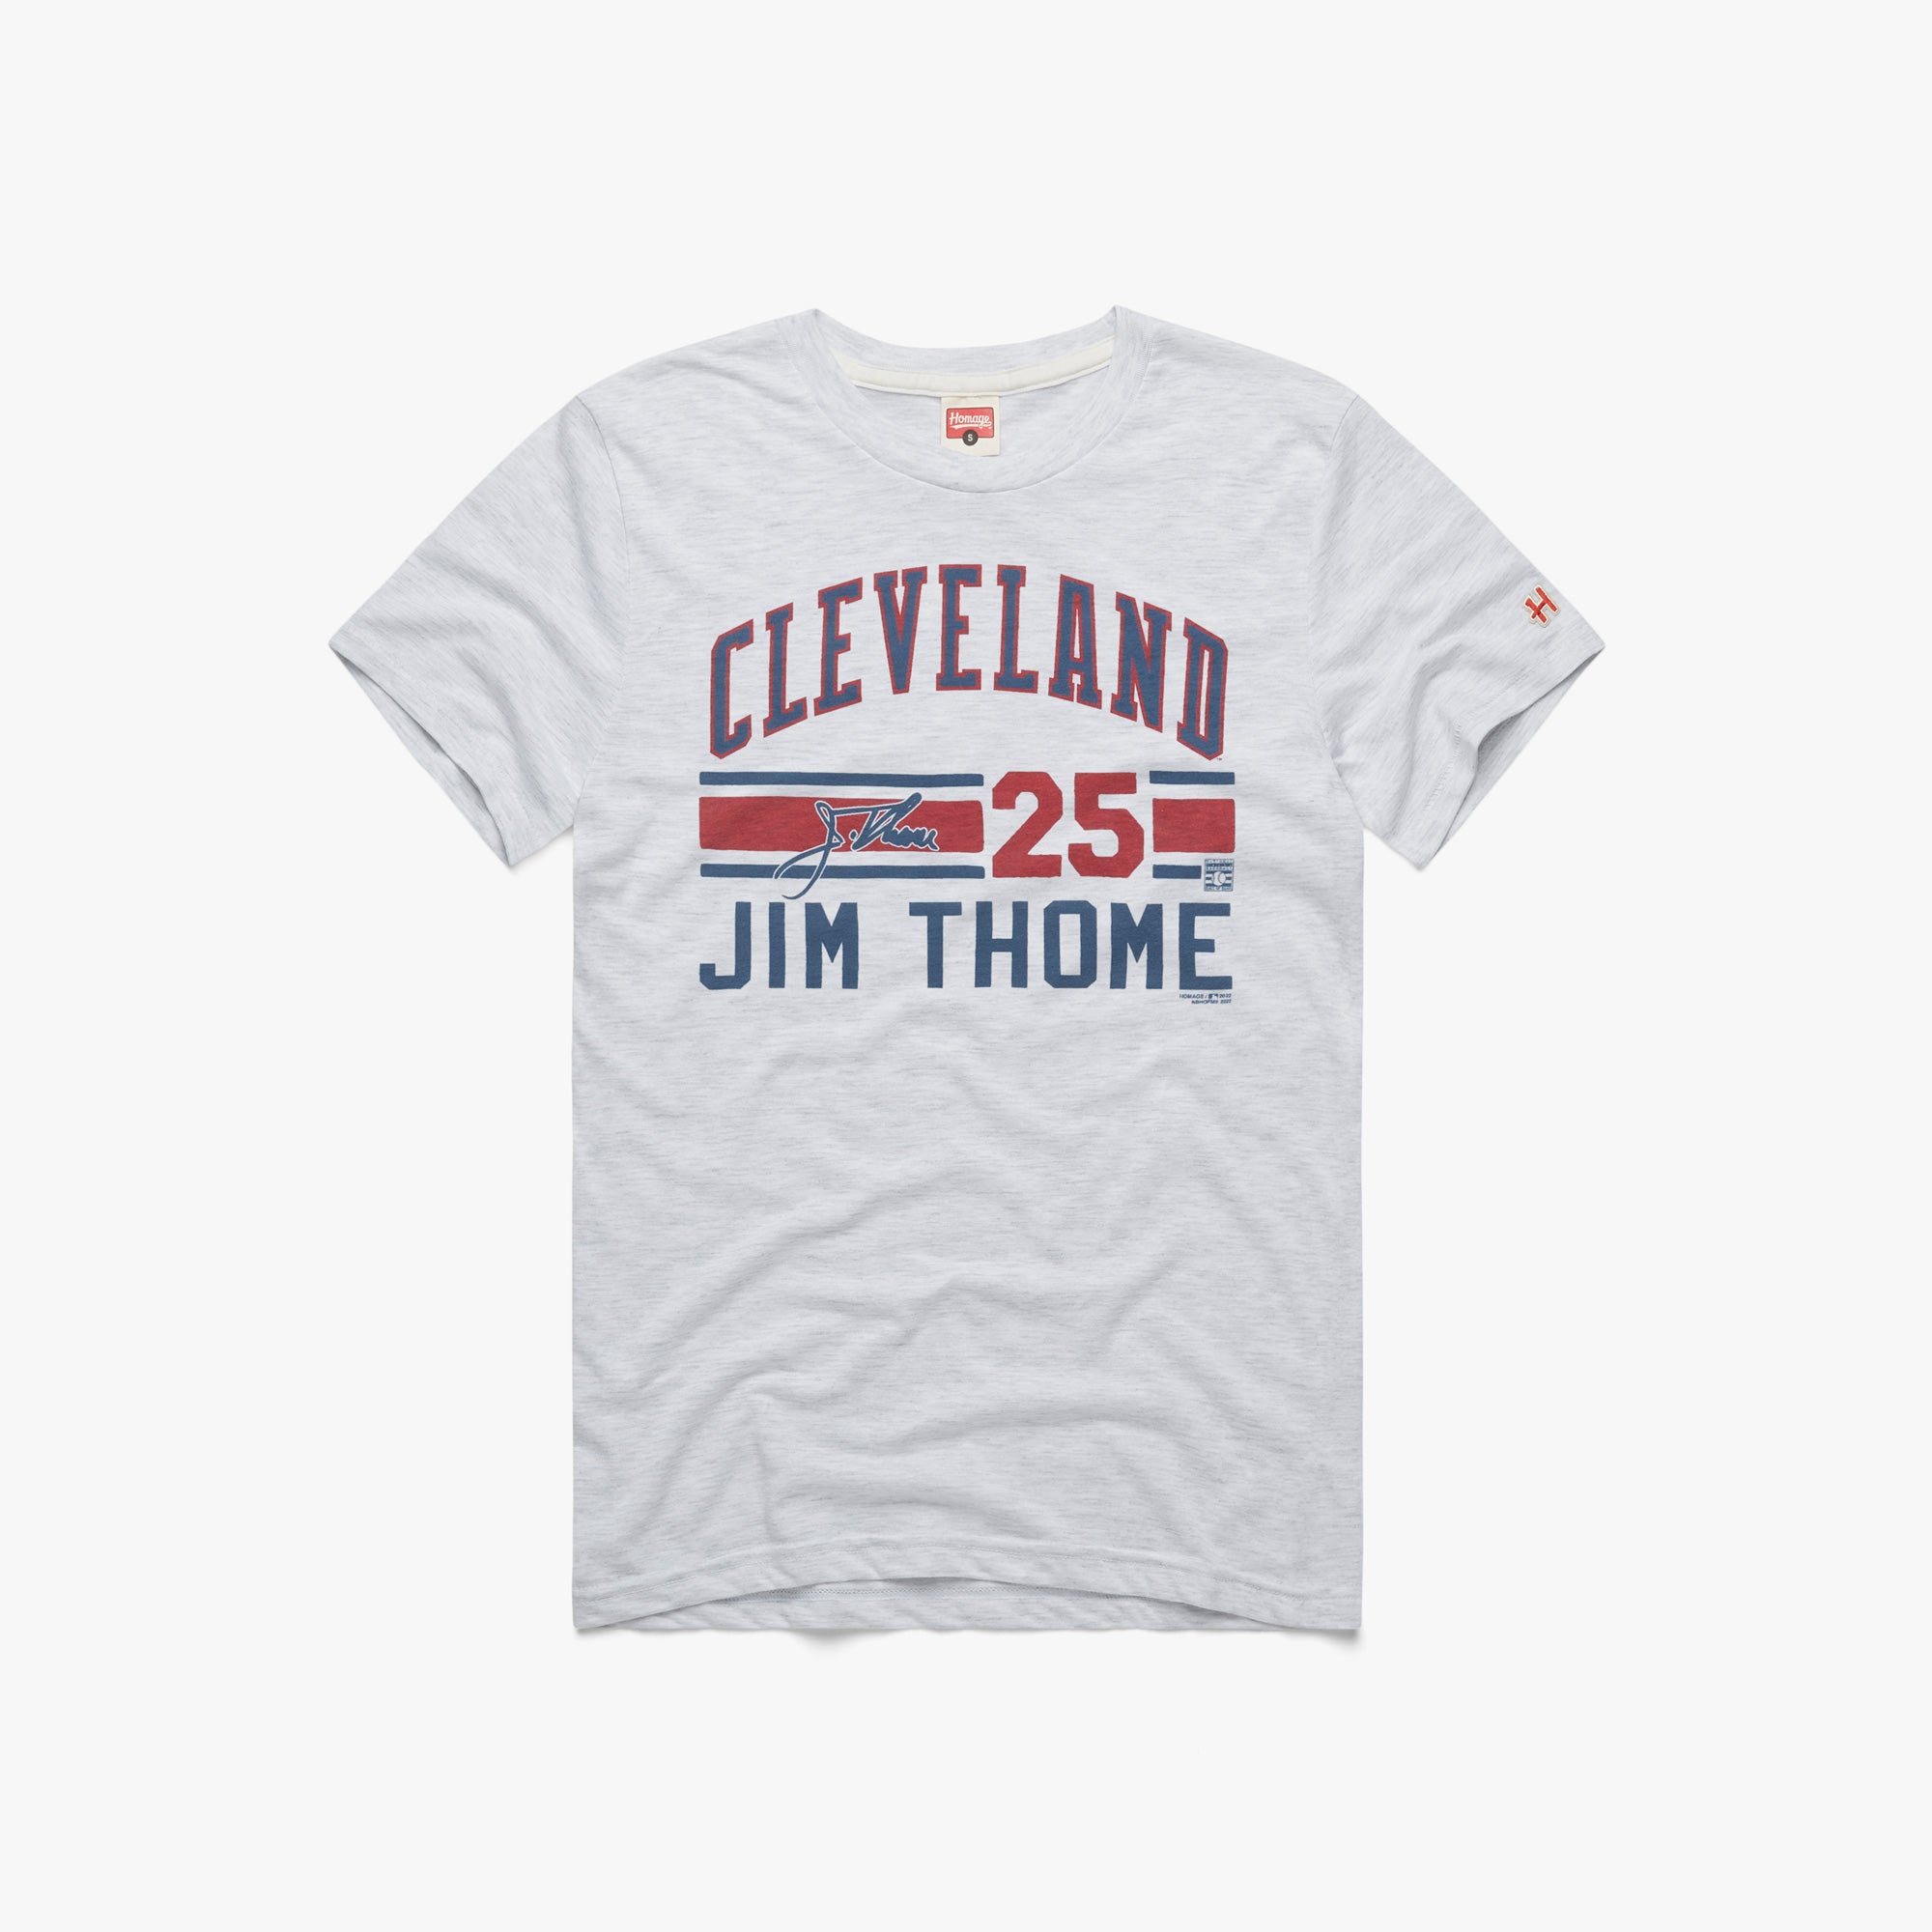 jim thome orioles jersey